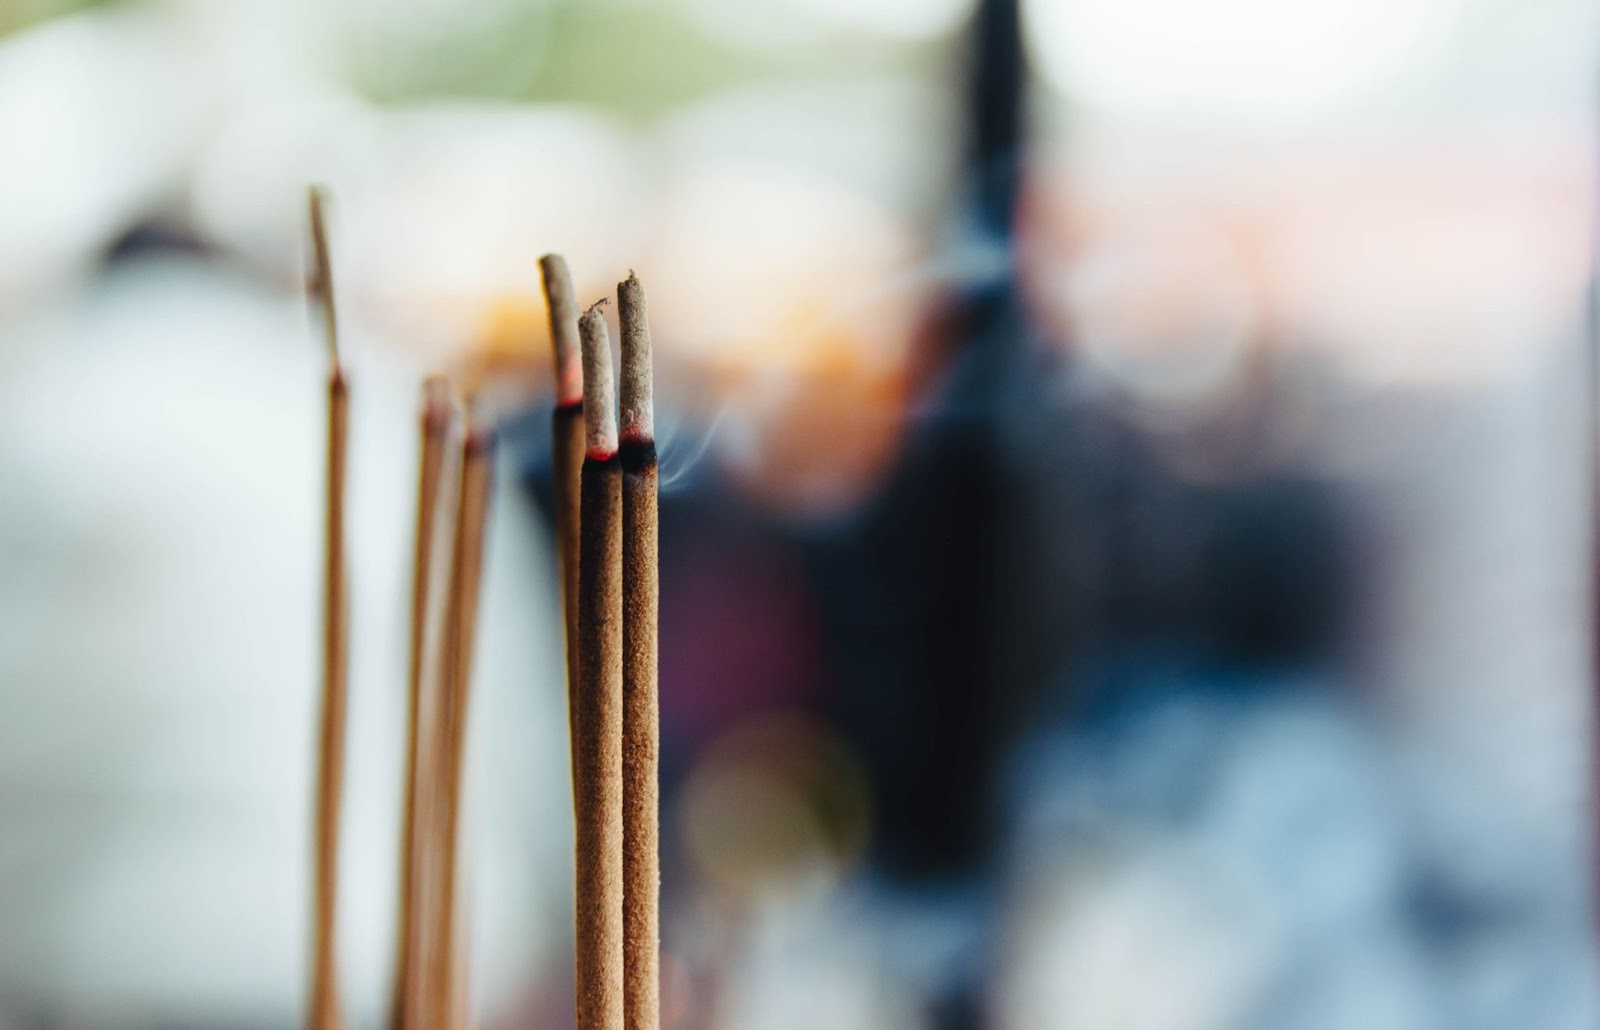 Burning incense is an ancient tradition